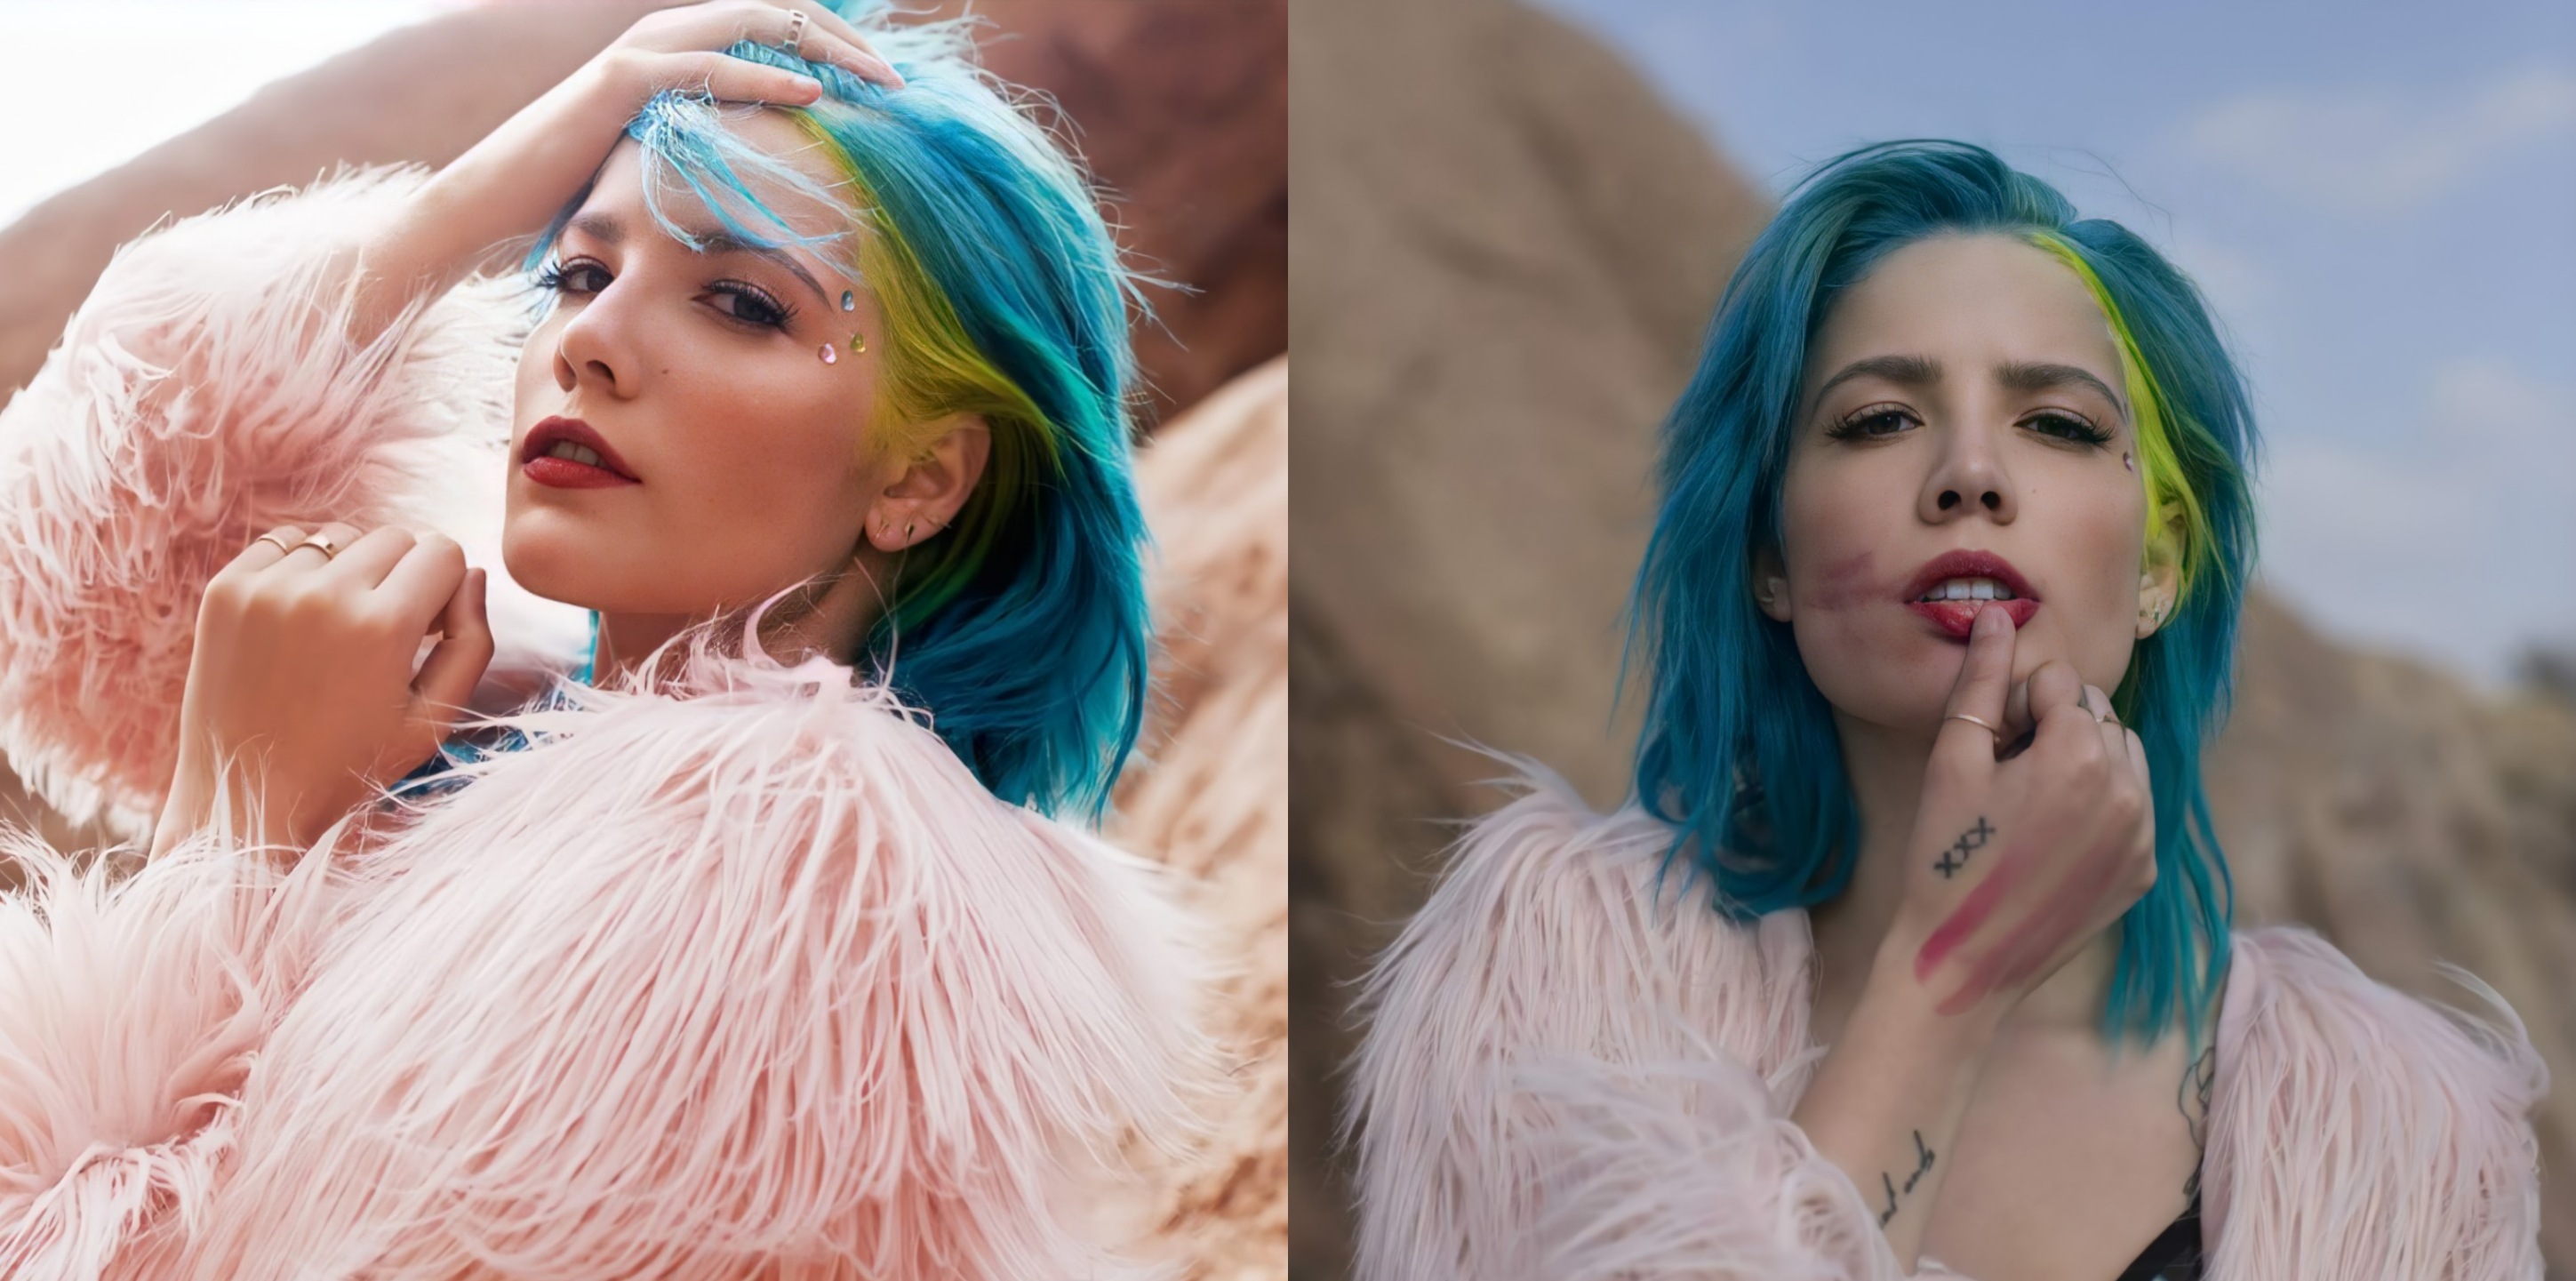 Halsey's Blue Hair Evolution: From "Badlands" to "Manic" - wide 4